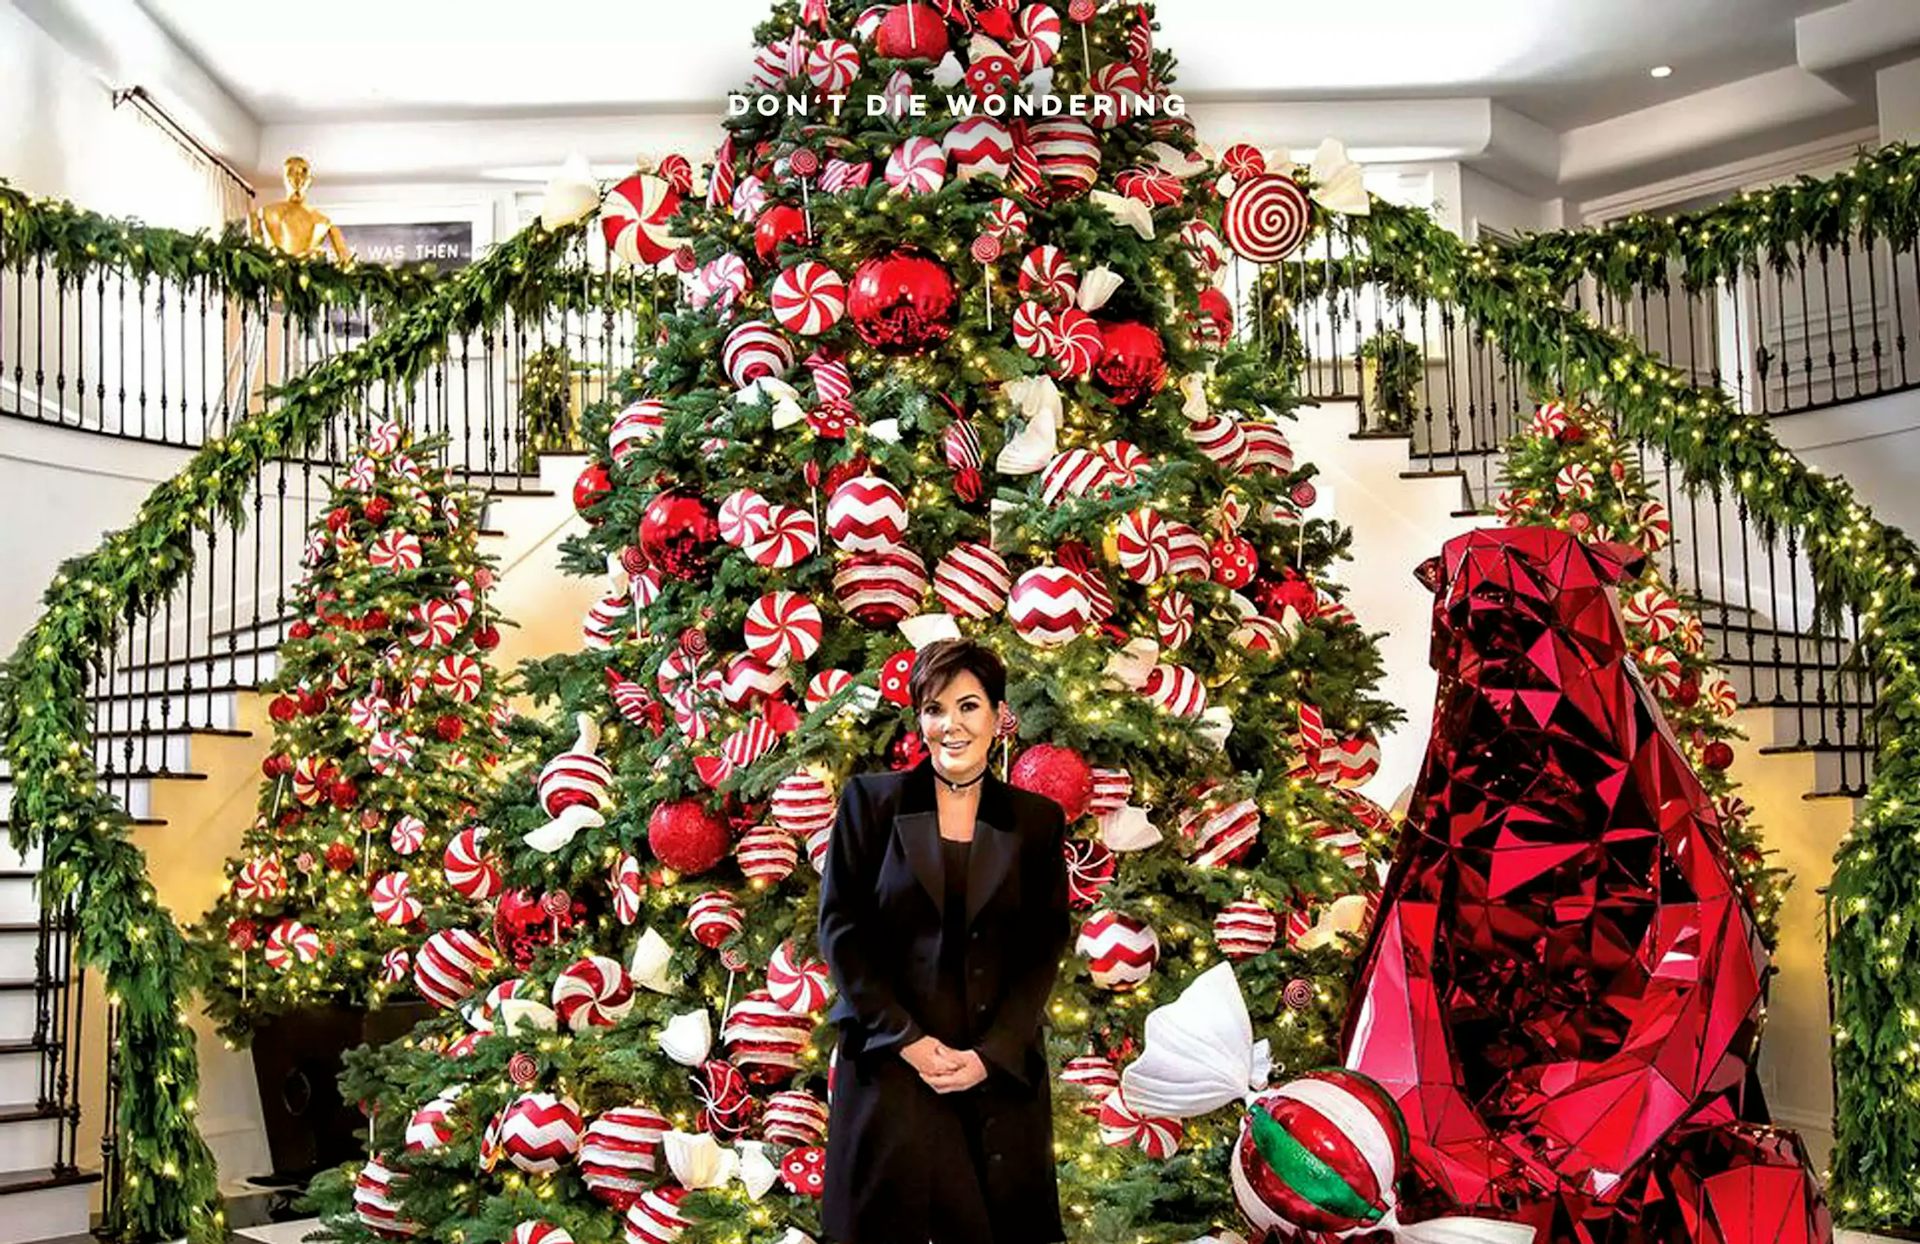 The Kardashians’ Florist Shares Tips For Decorating Your Christmas Tree